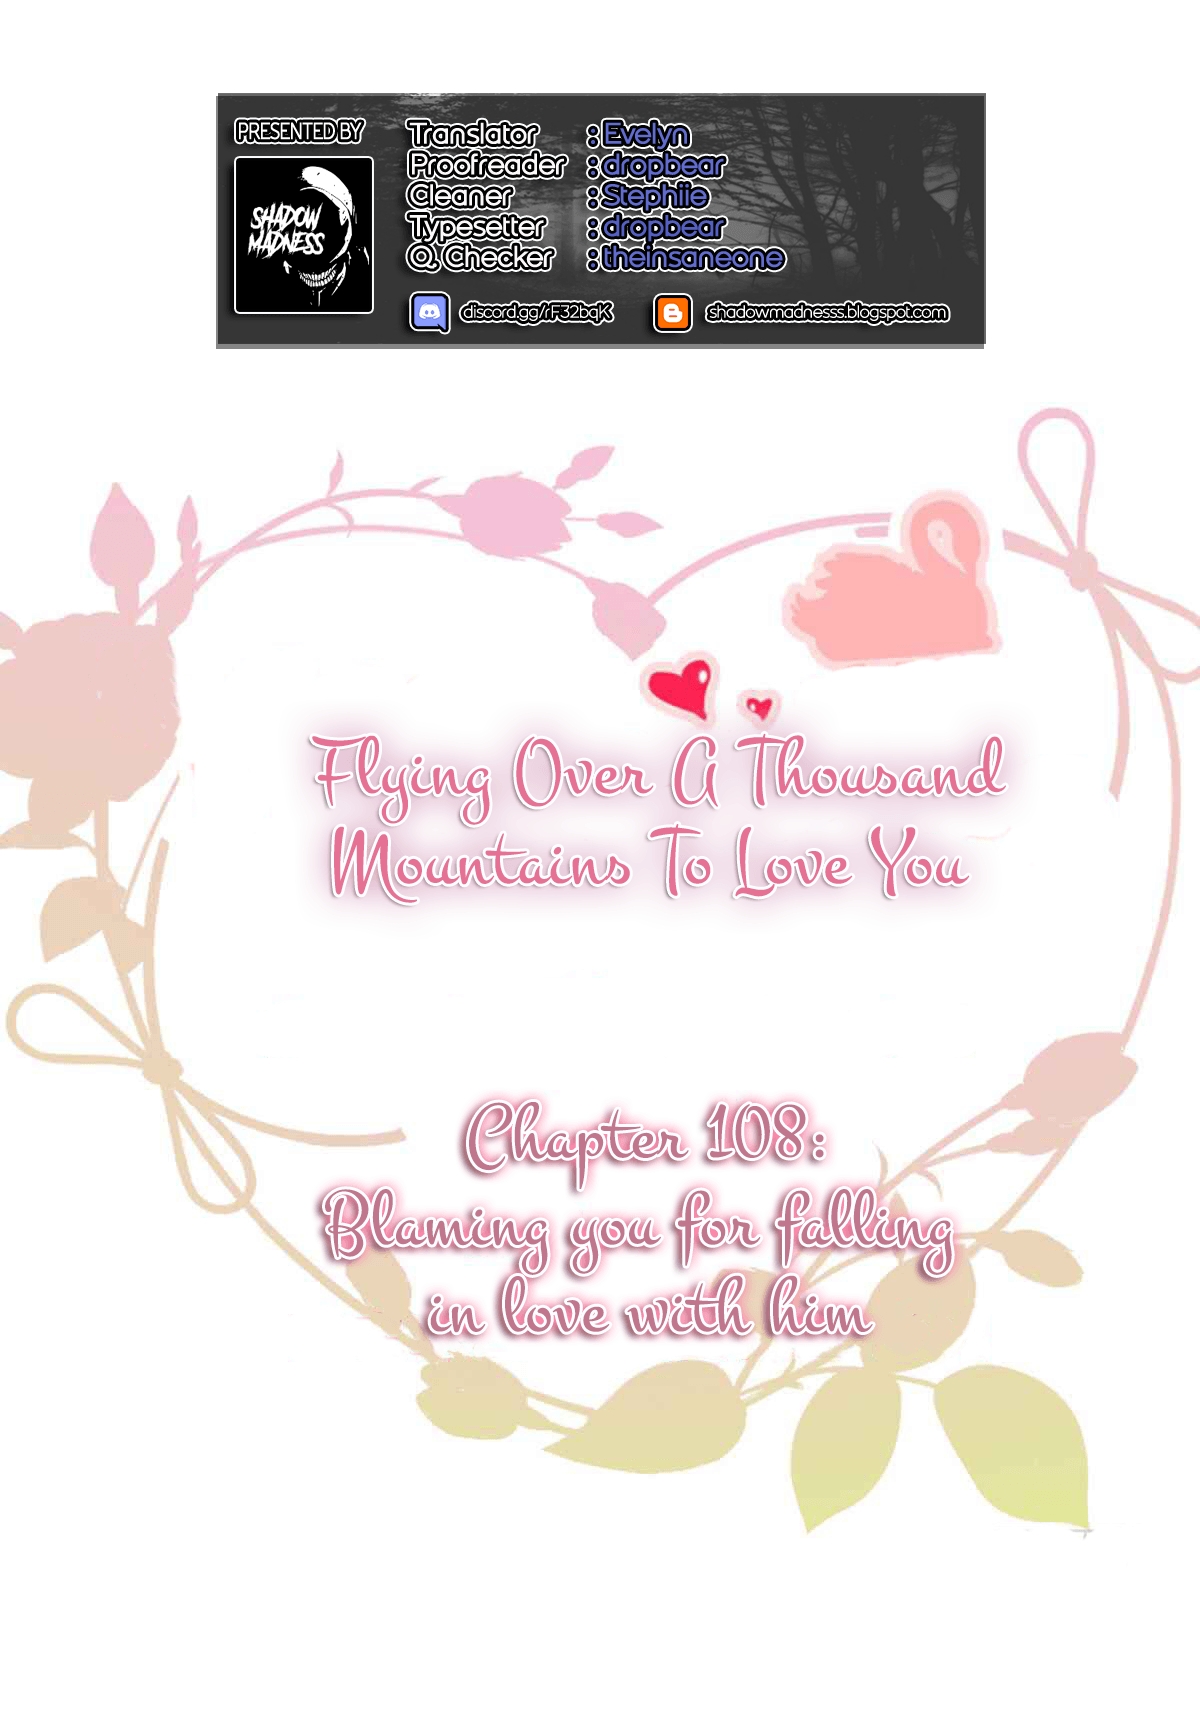 Flying Over a Thousand Mountains to Love You Ch. 108 Blaming you for falling in love with him